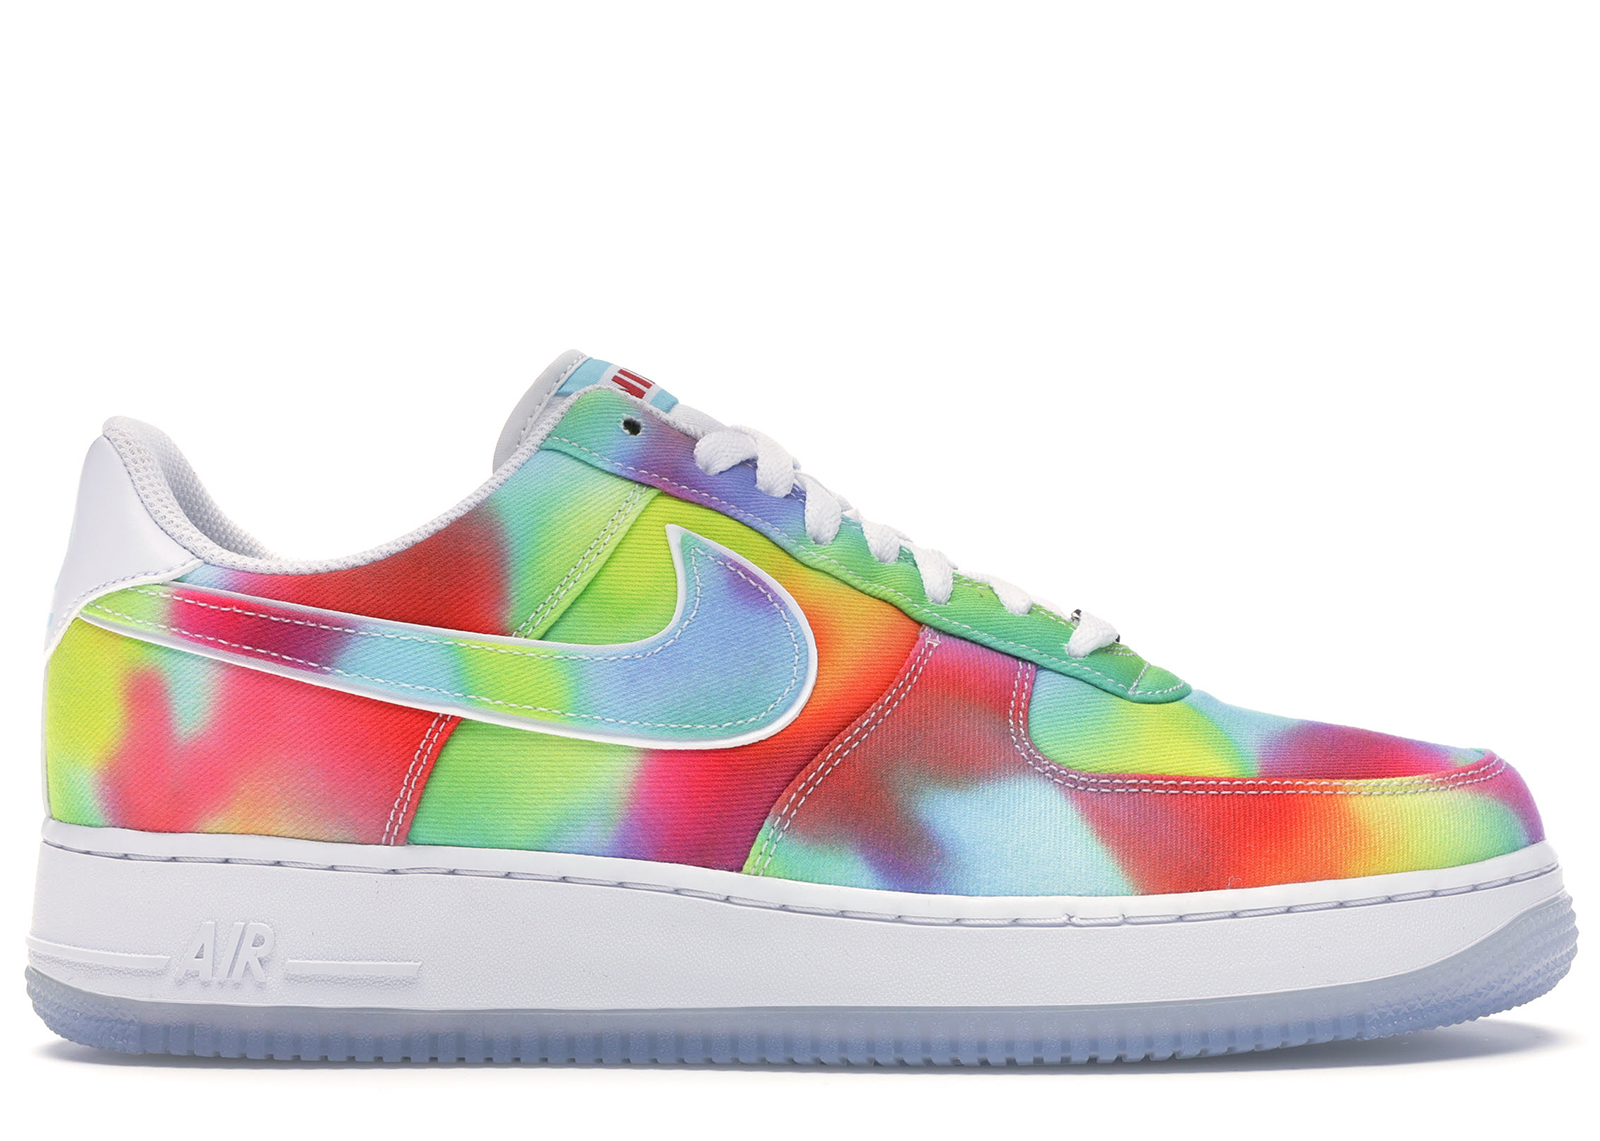 Nike Air Force 1 Low Tie Dye Chicago - CK0838-100